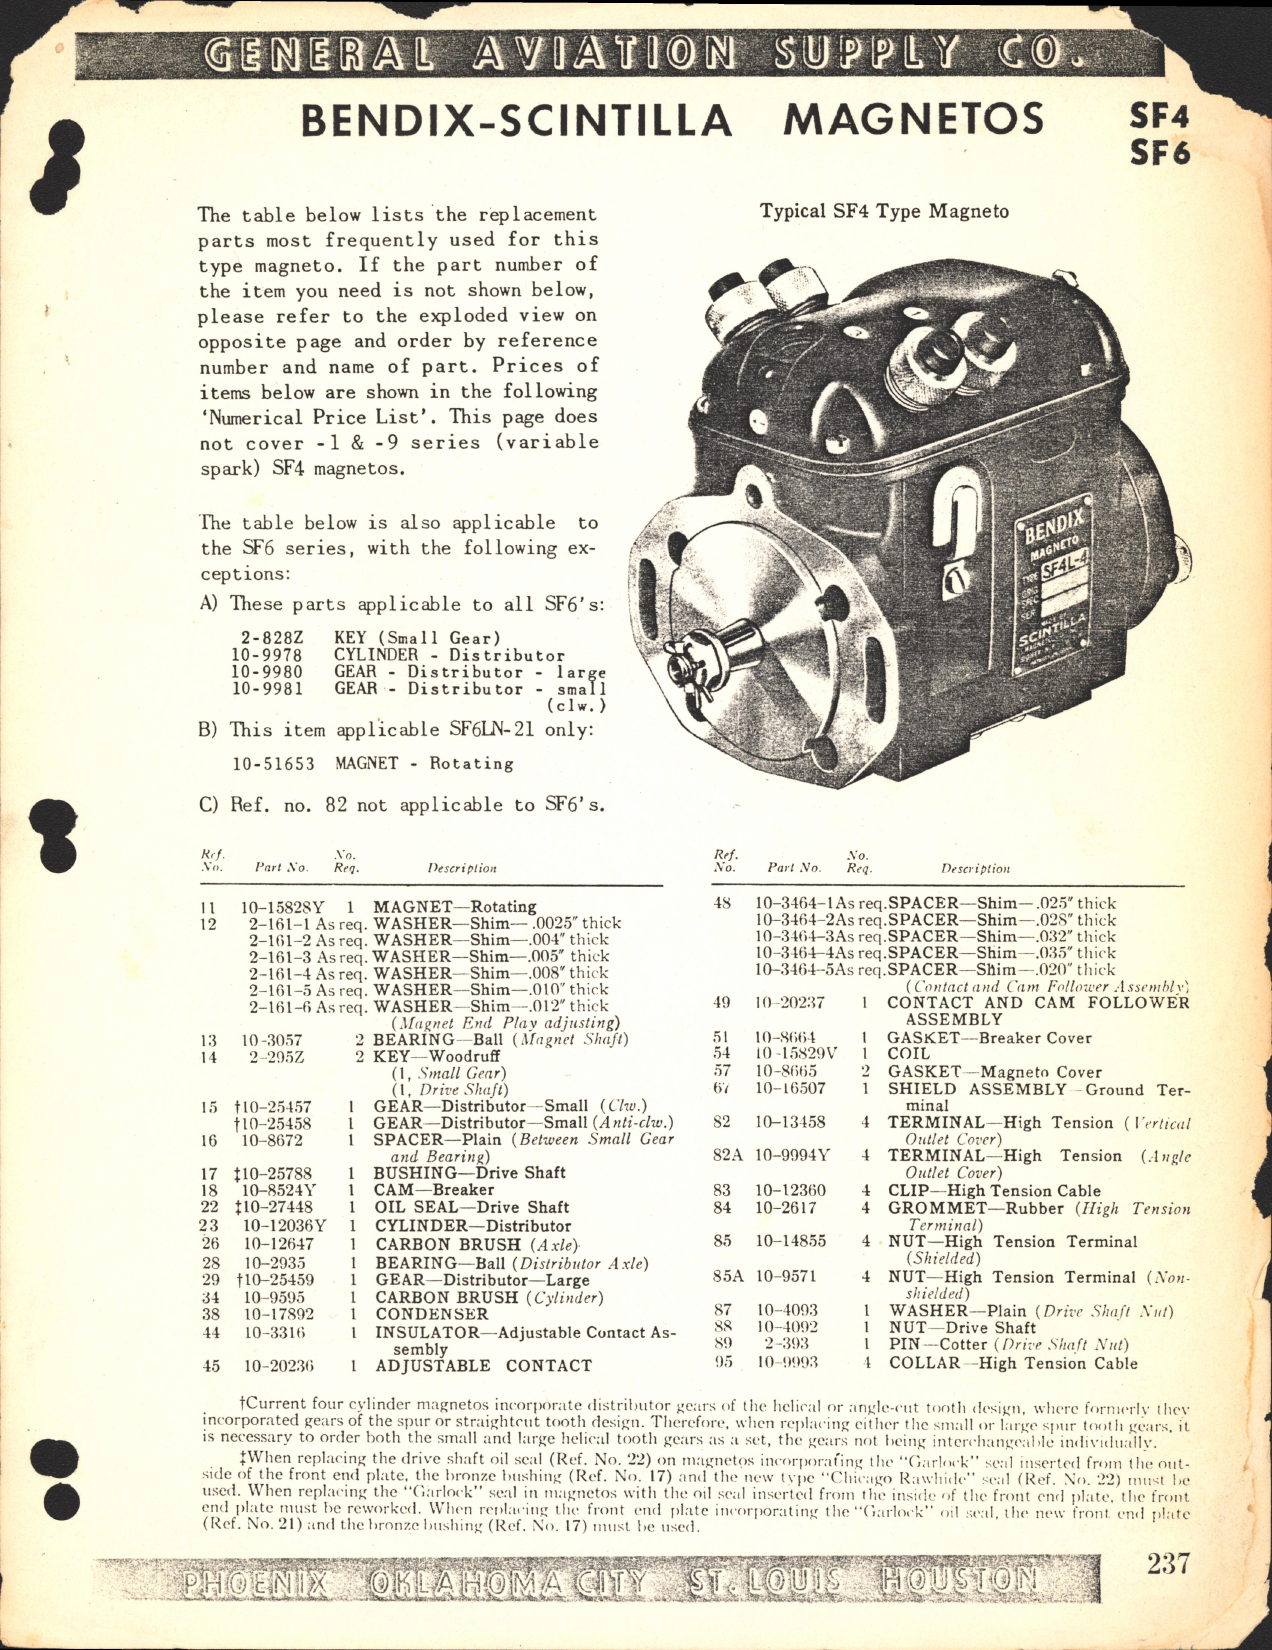 Sample page 1 from AirCorps Library document: Bendix-Scintilla Magnetos, Type SF4 & SF6